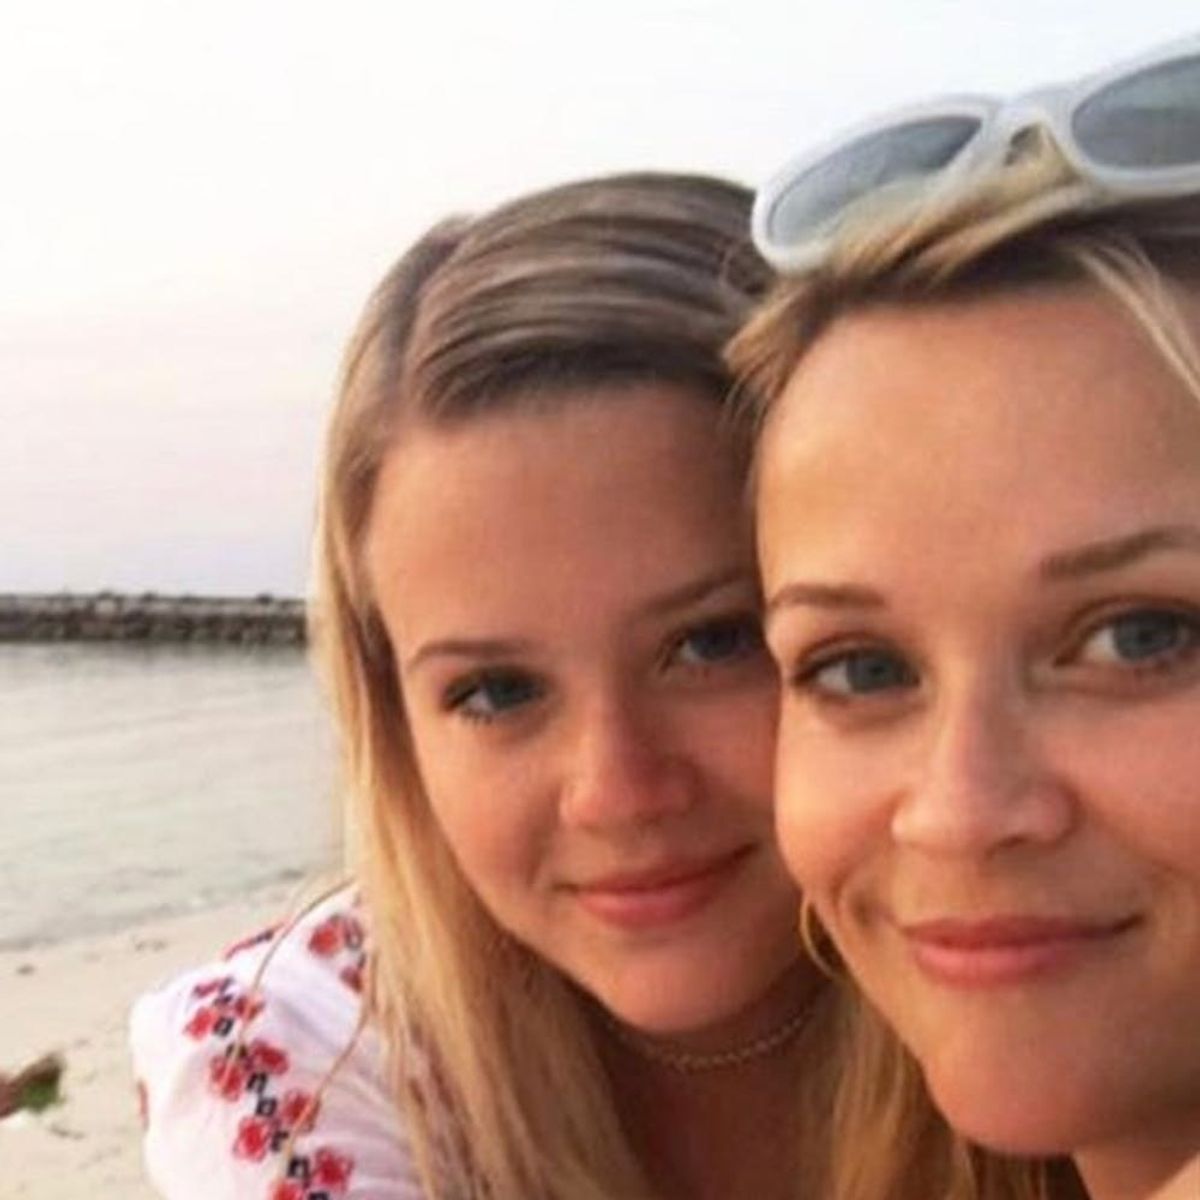 Reese Witherspoon’s Latest Pic With Her Daughter Has Us Seeing Double